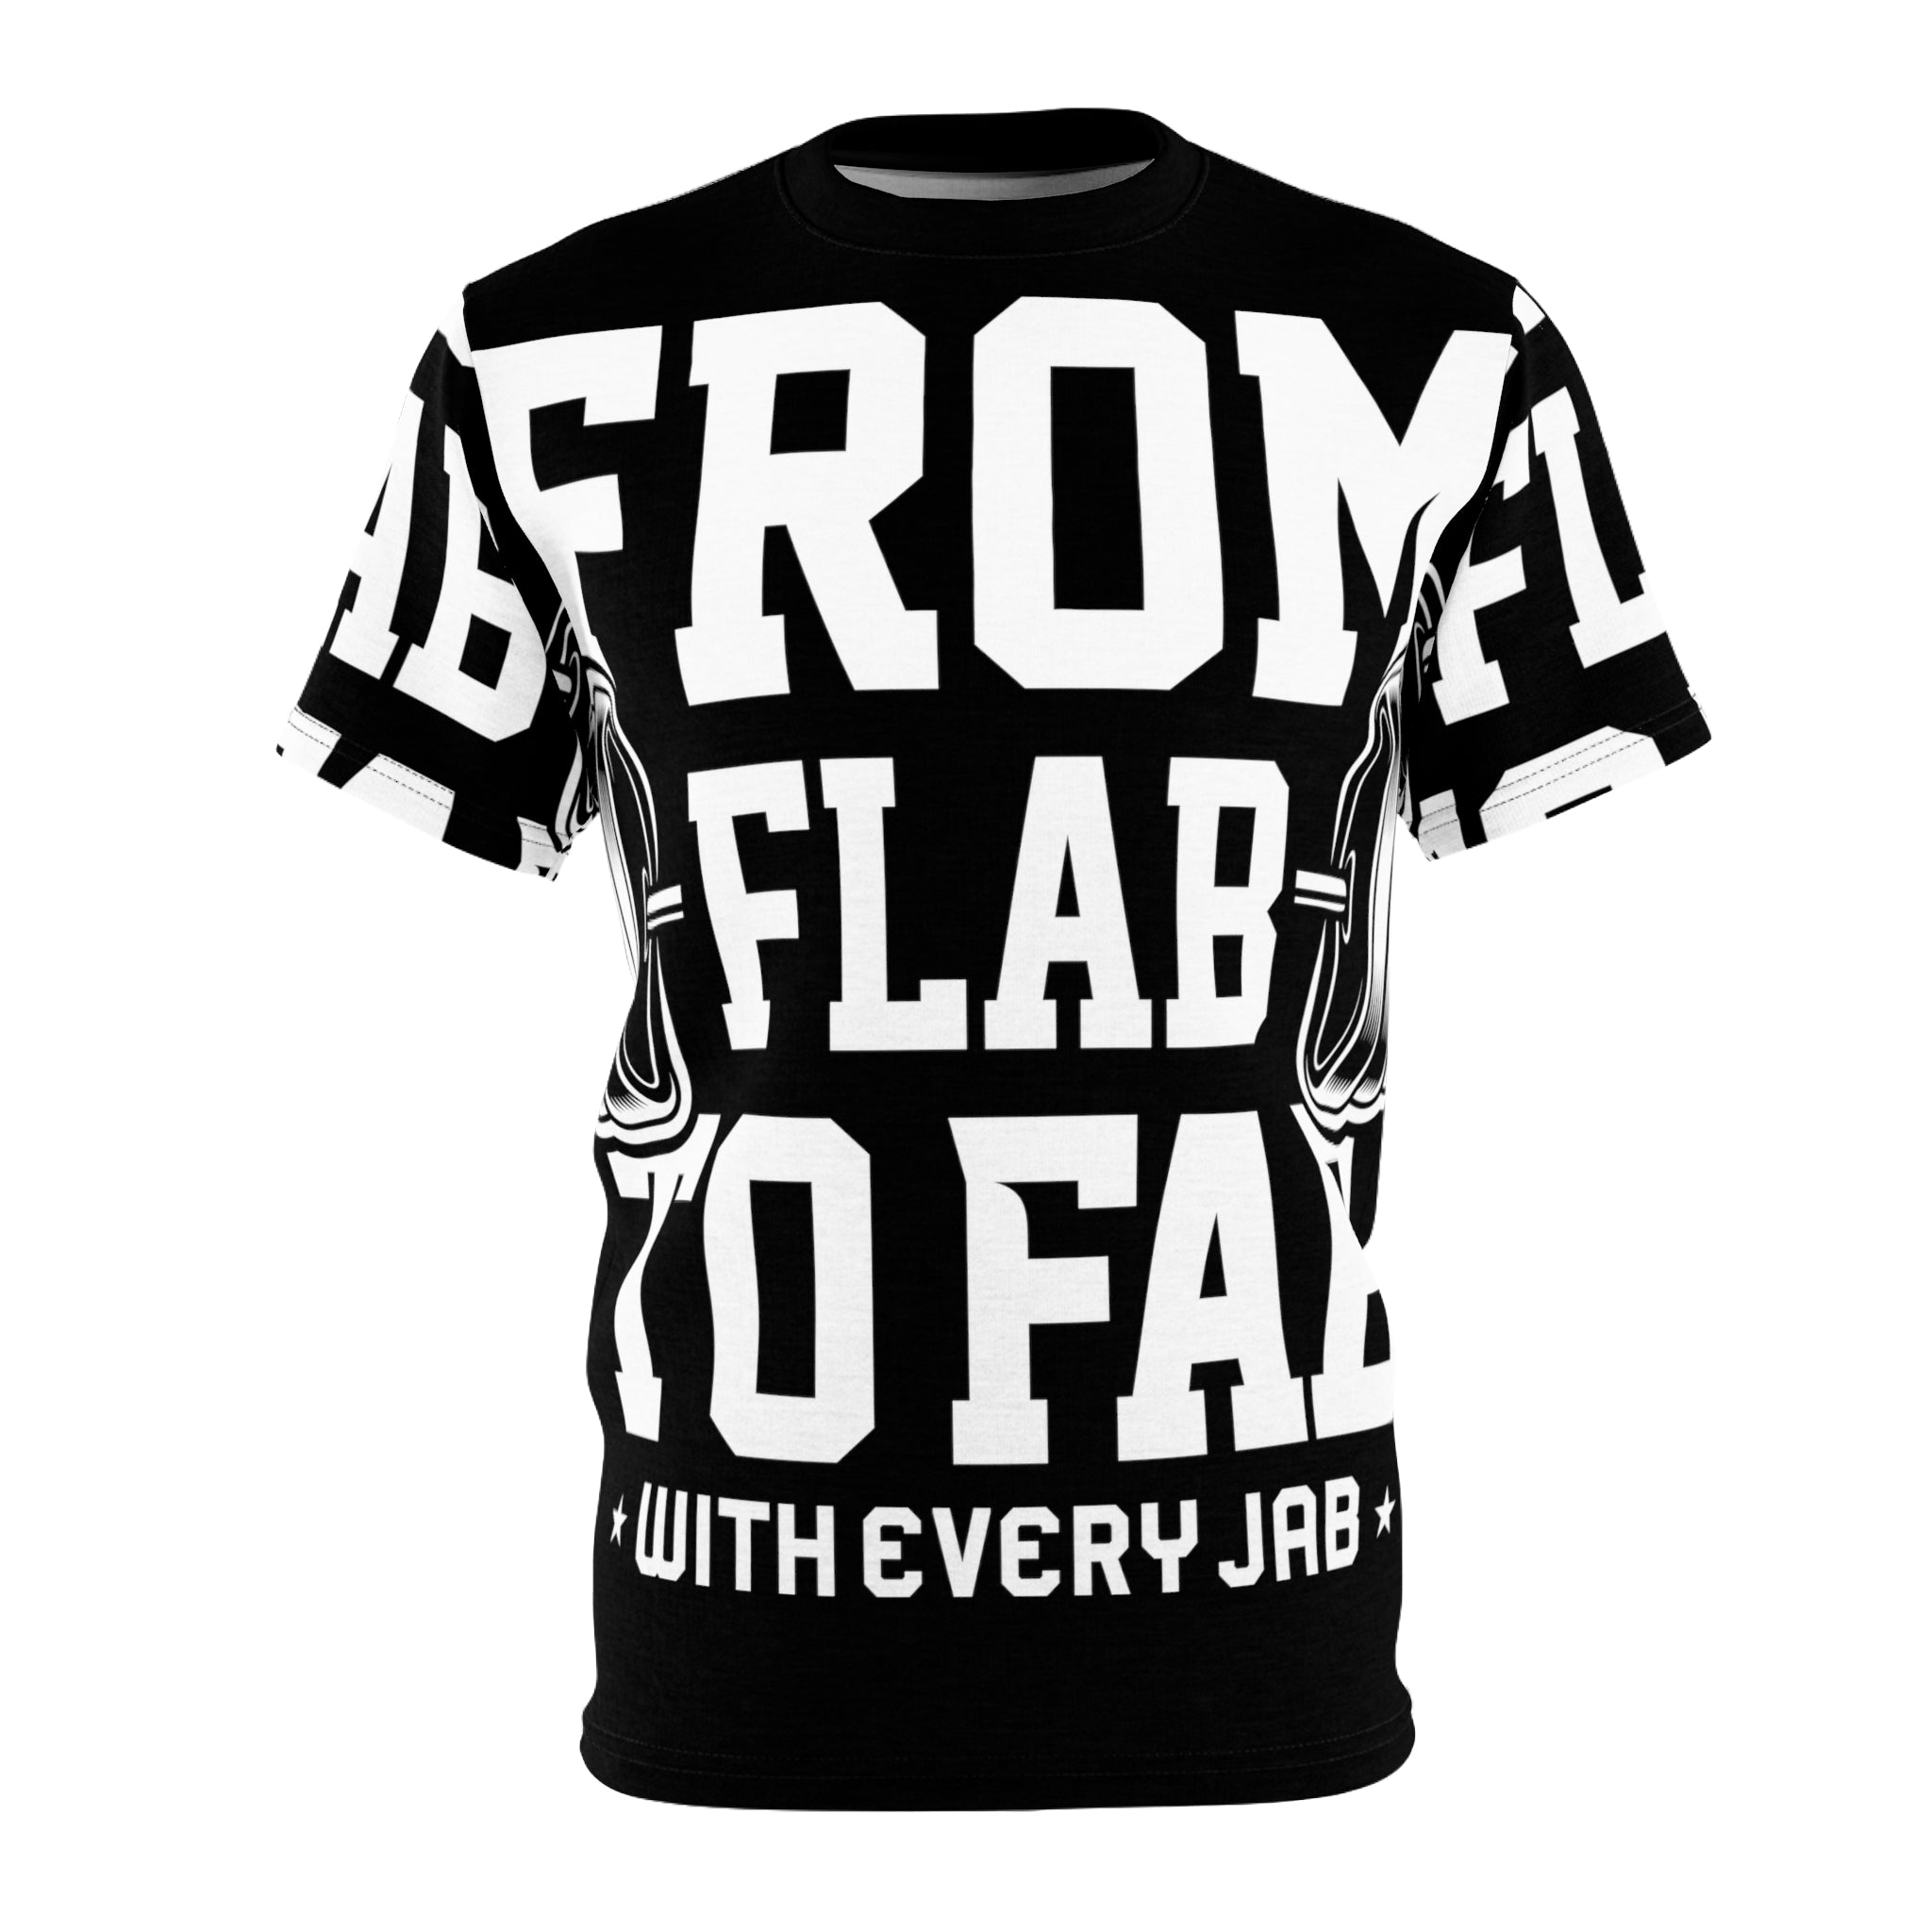 "From Flab to Fab - With Every Jab" Unisex Cut & Sew Tee (AOP)